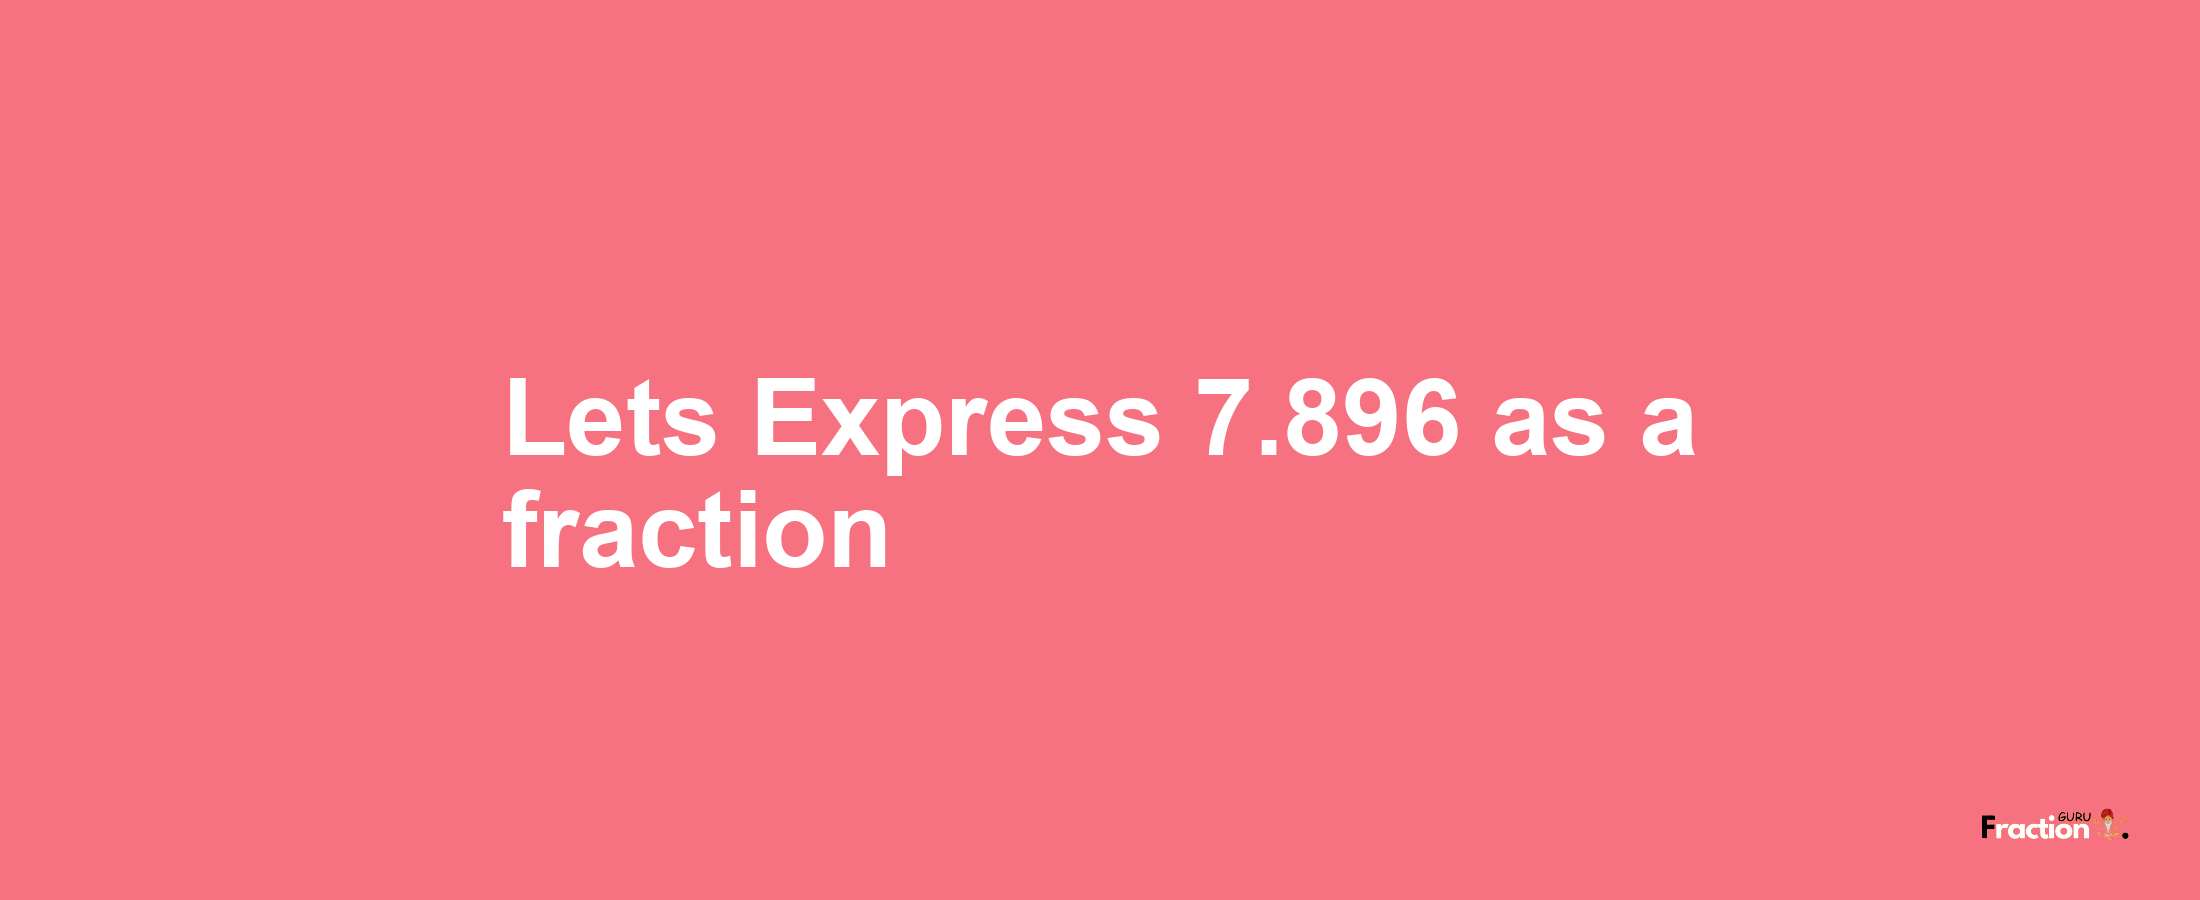 Lets Express 7.896 as afraction